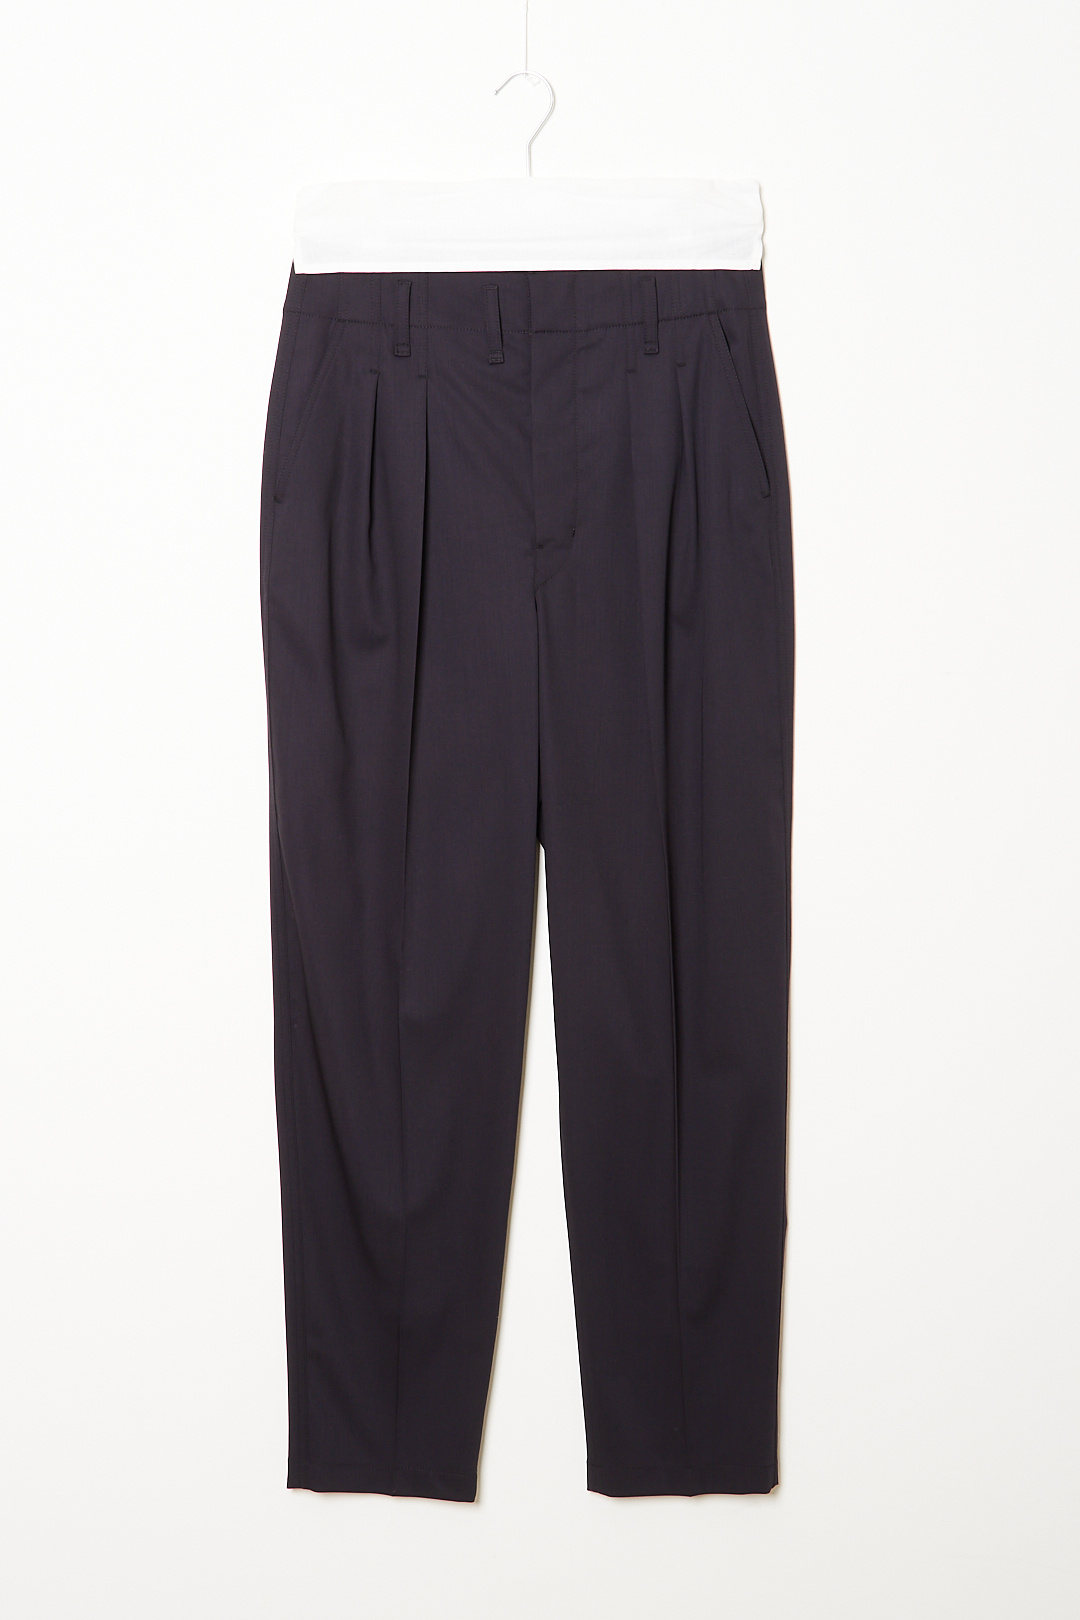 Lemaire - Tailored pleated pants